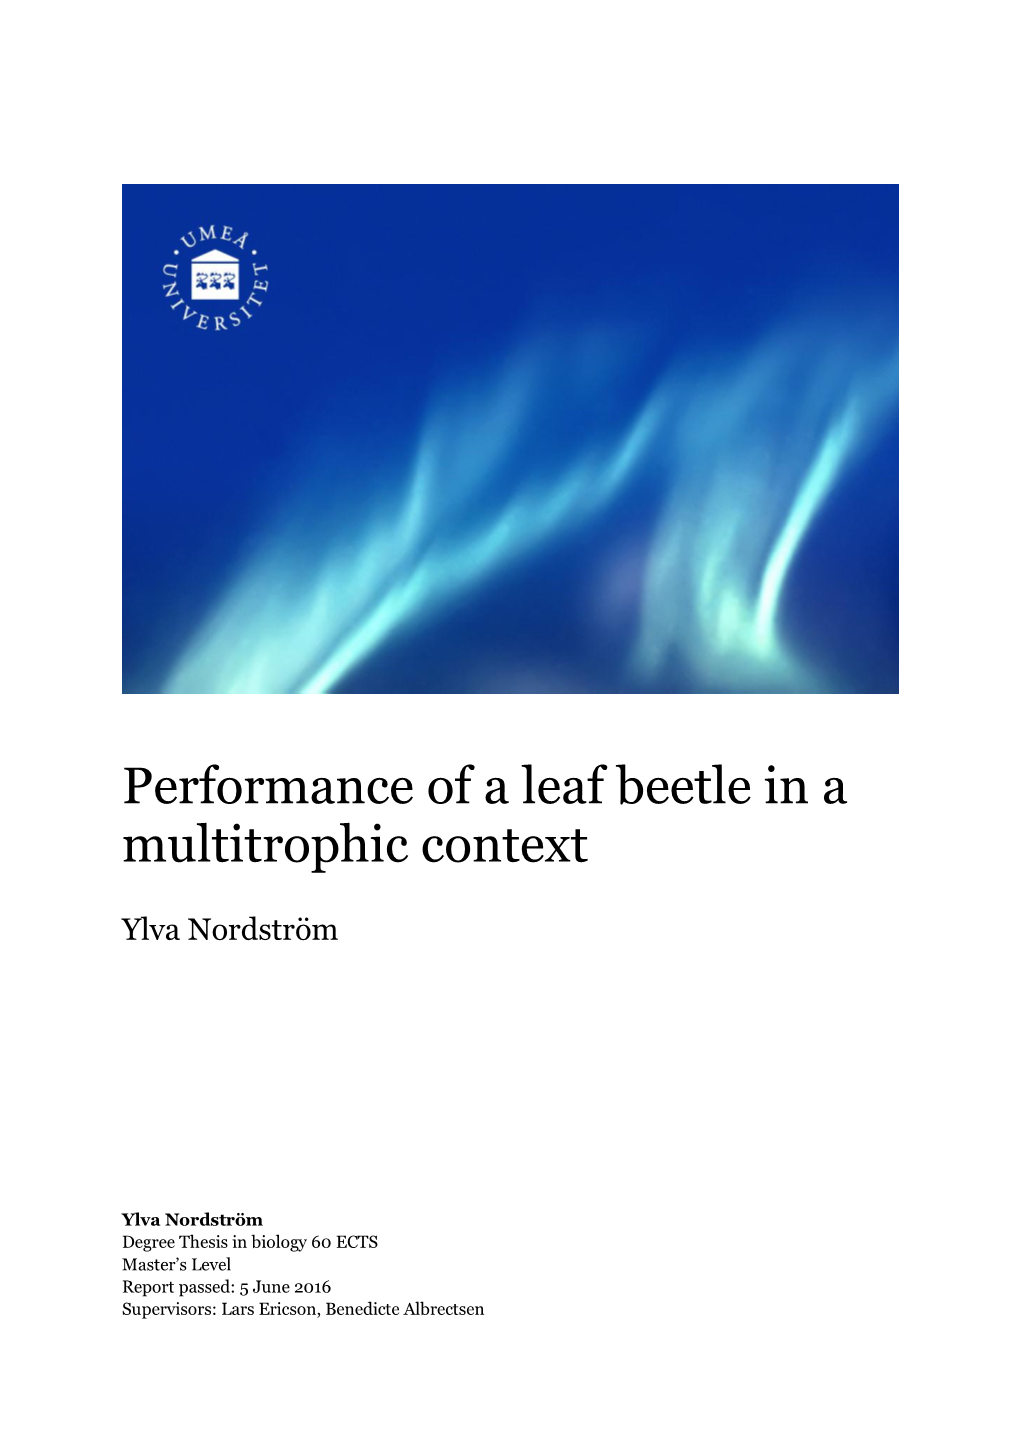 Performance of a Leaf Beetle in a Multitrophic Context